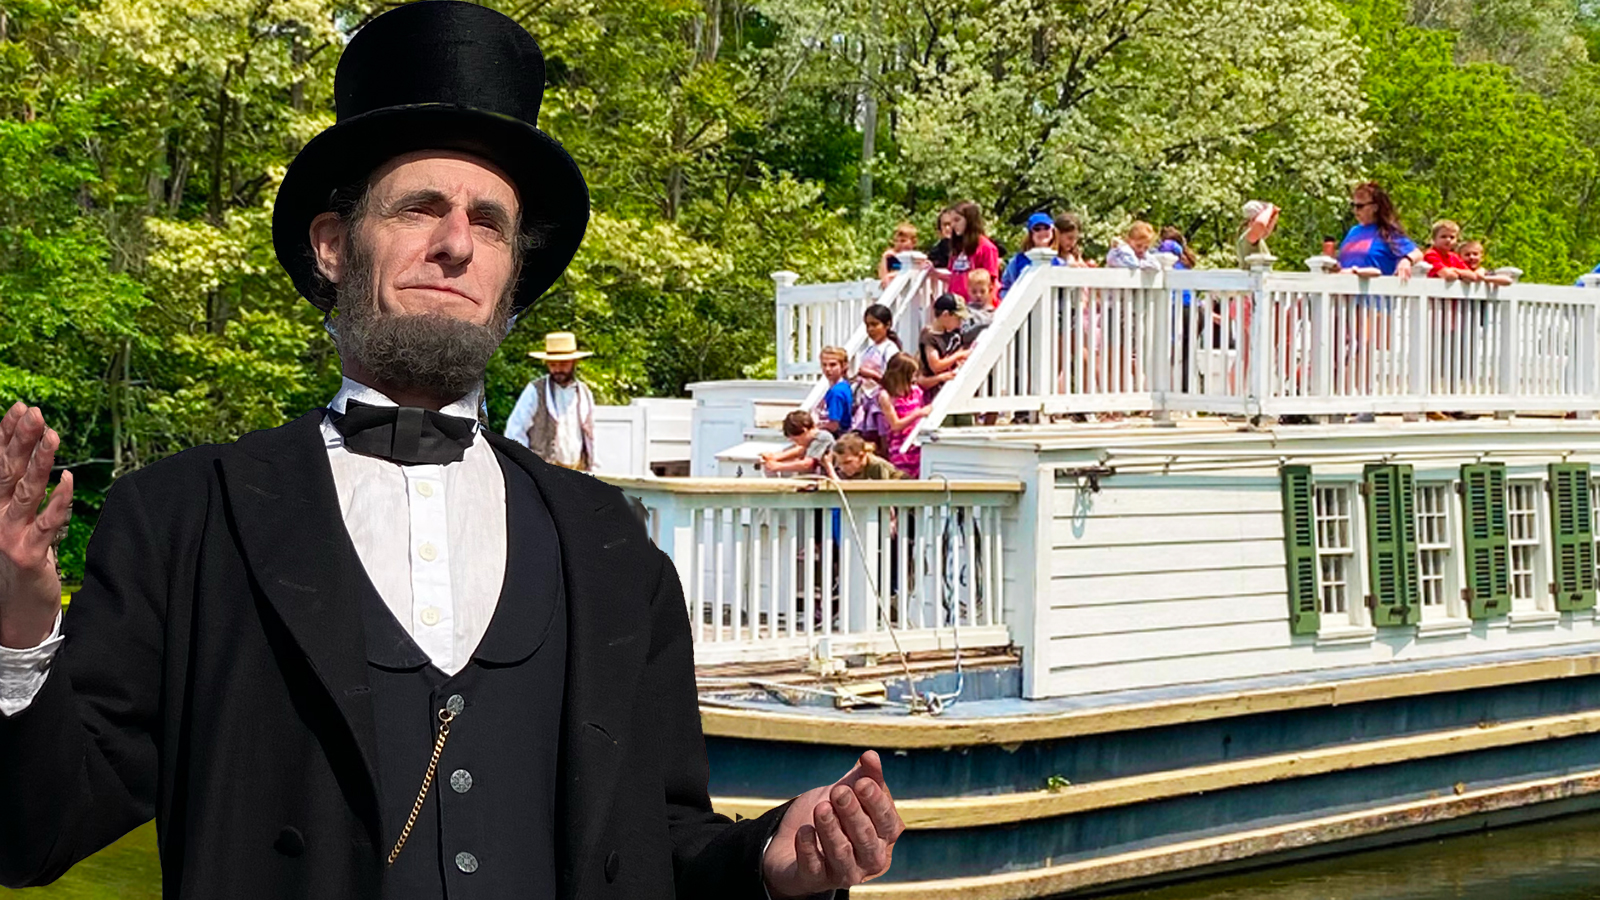 Abraham Lincoln standing next to boat